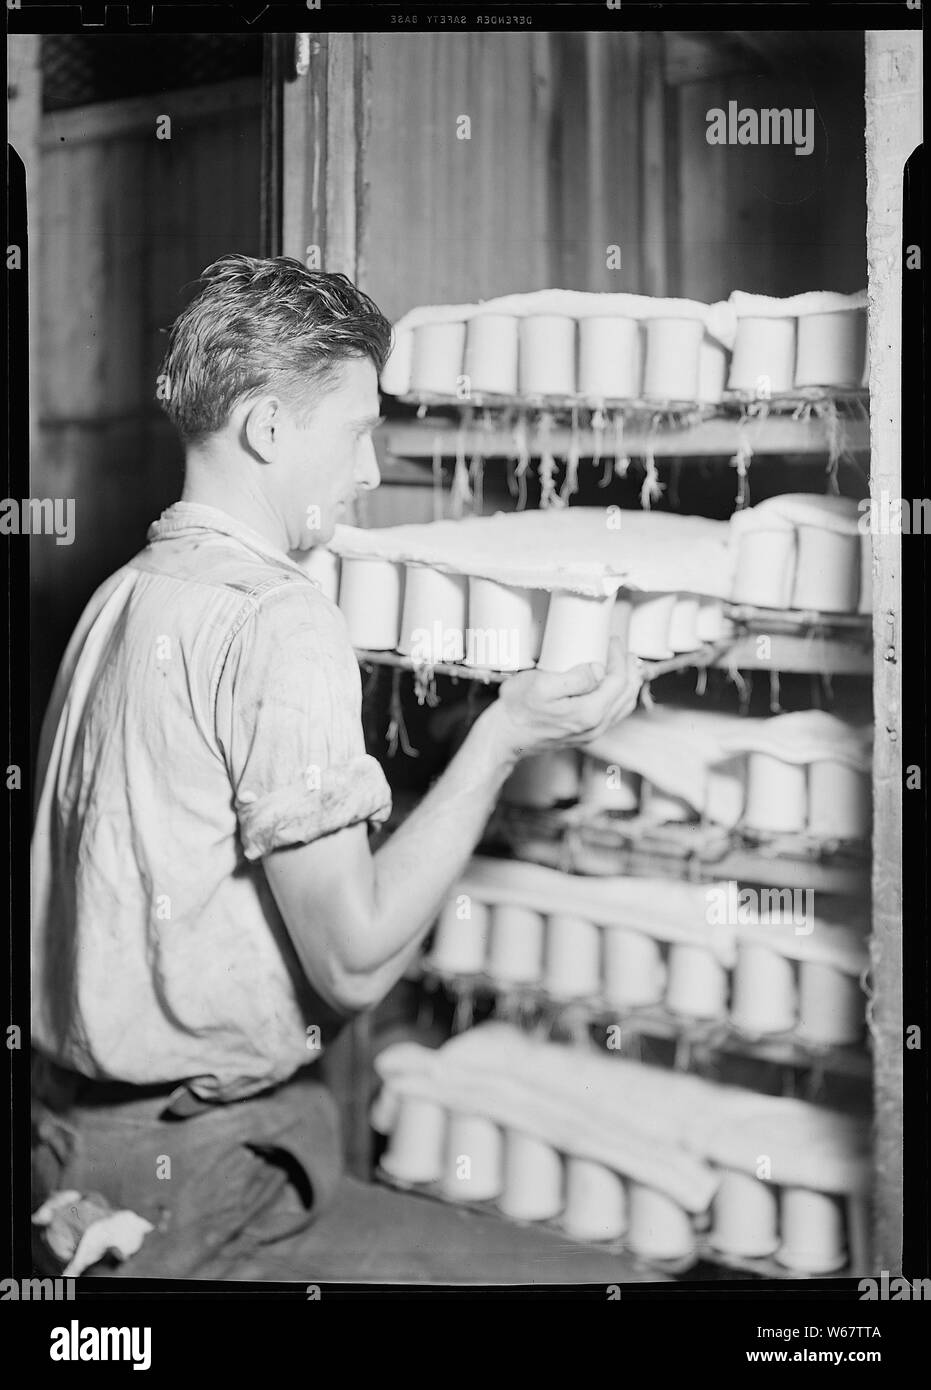 Paterson, New Jersey - Textiles. Bobbins being shelved prior to use on warping creel. Cloths are put over the bobbins to prevent too rapid drying out, as the thread must be slightly moist to work with. Stock Photo